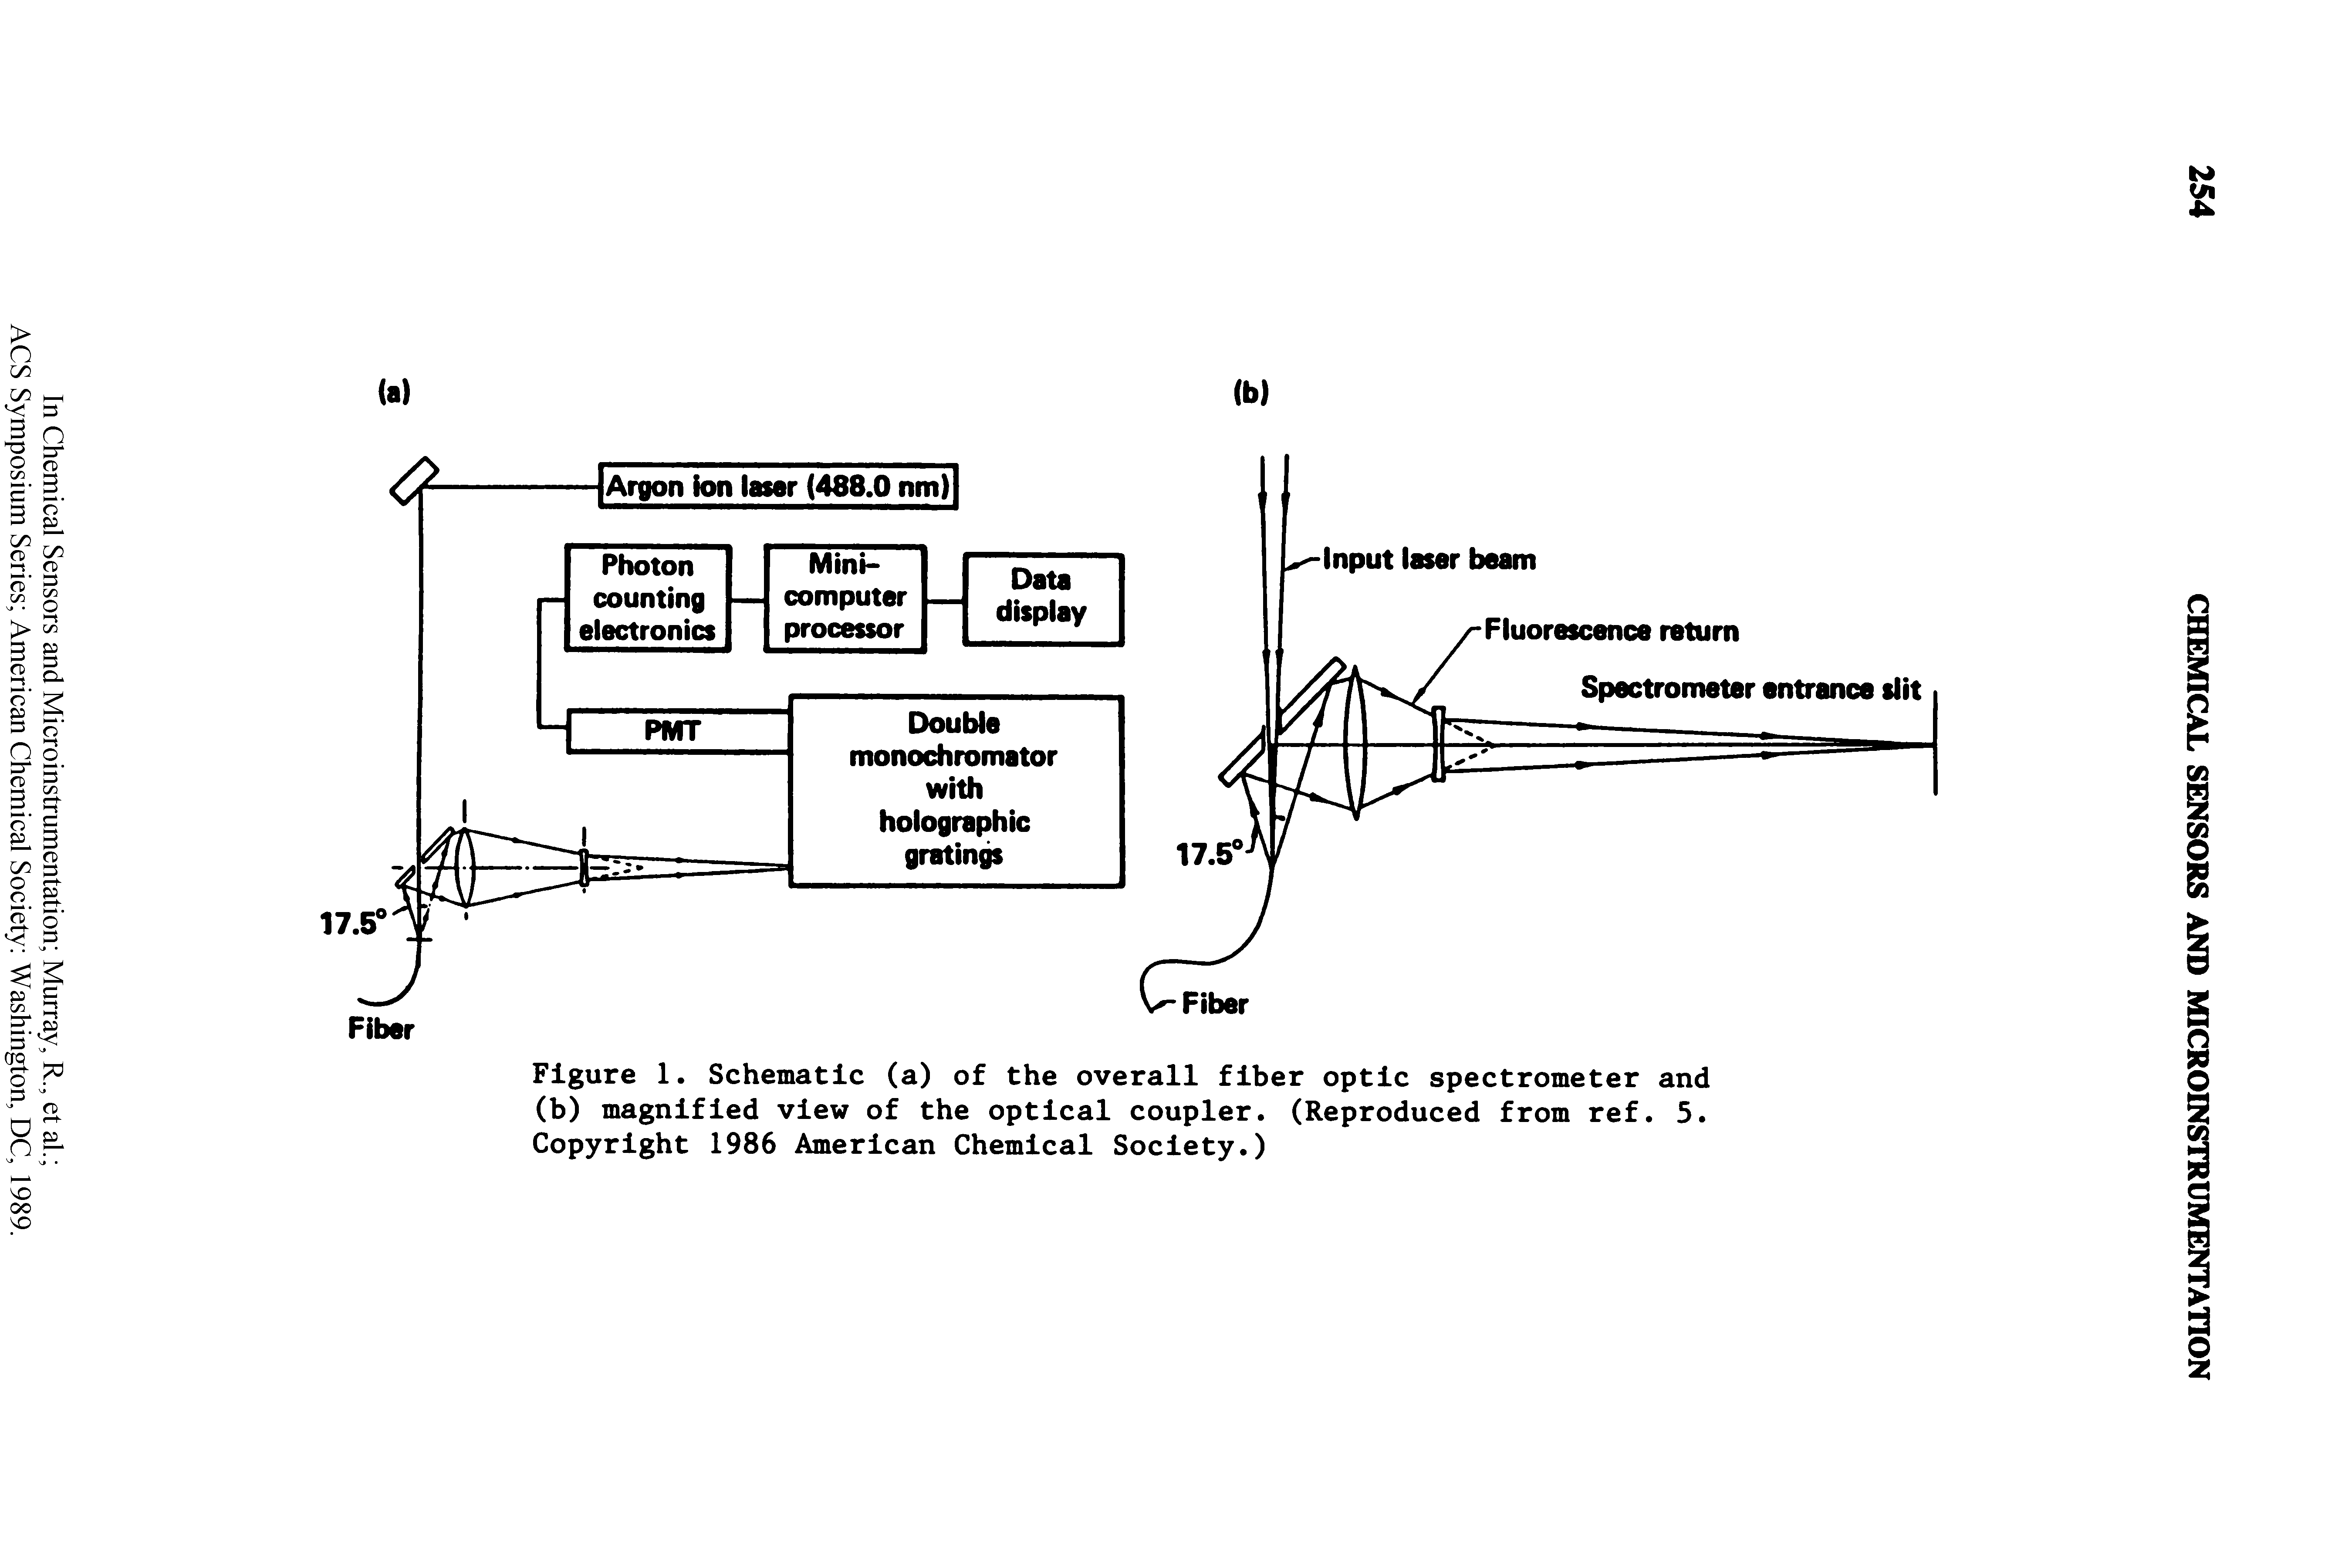 Figure 1. Schematic (a) of the overall fiber optic spectrometer and (b) magnified view of the optical coupler. (Reproduced from ref. 5. Copyright 1986 American Chemical Society.)...